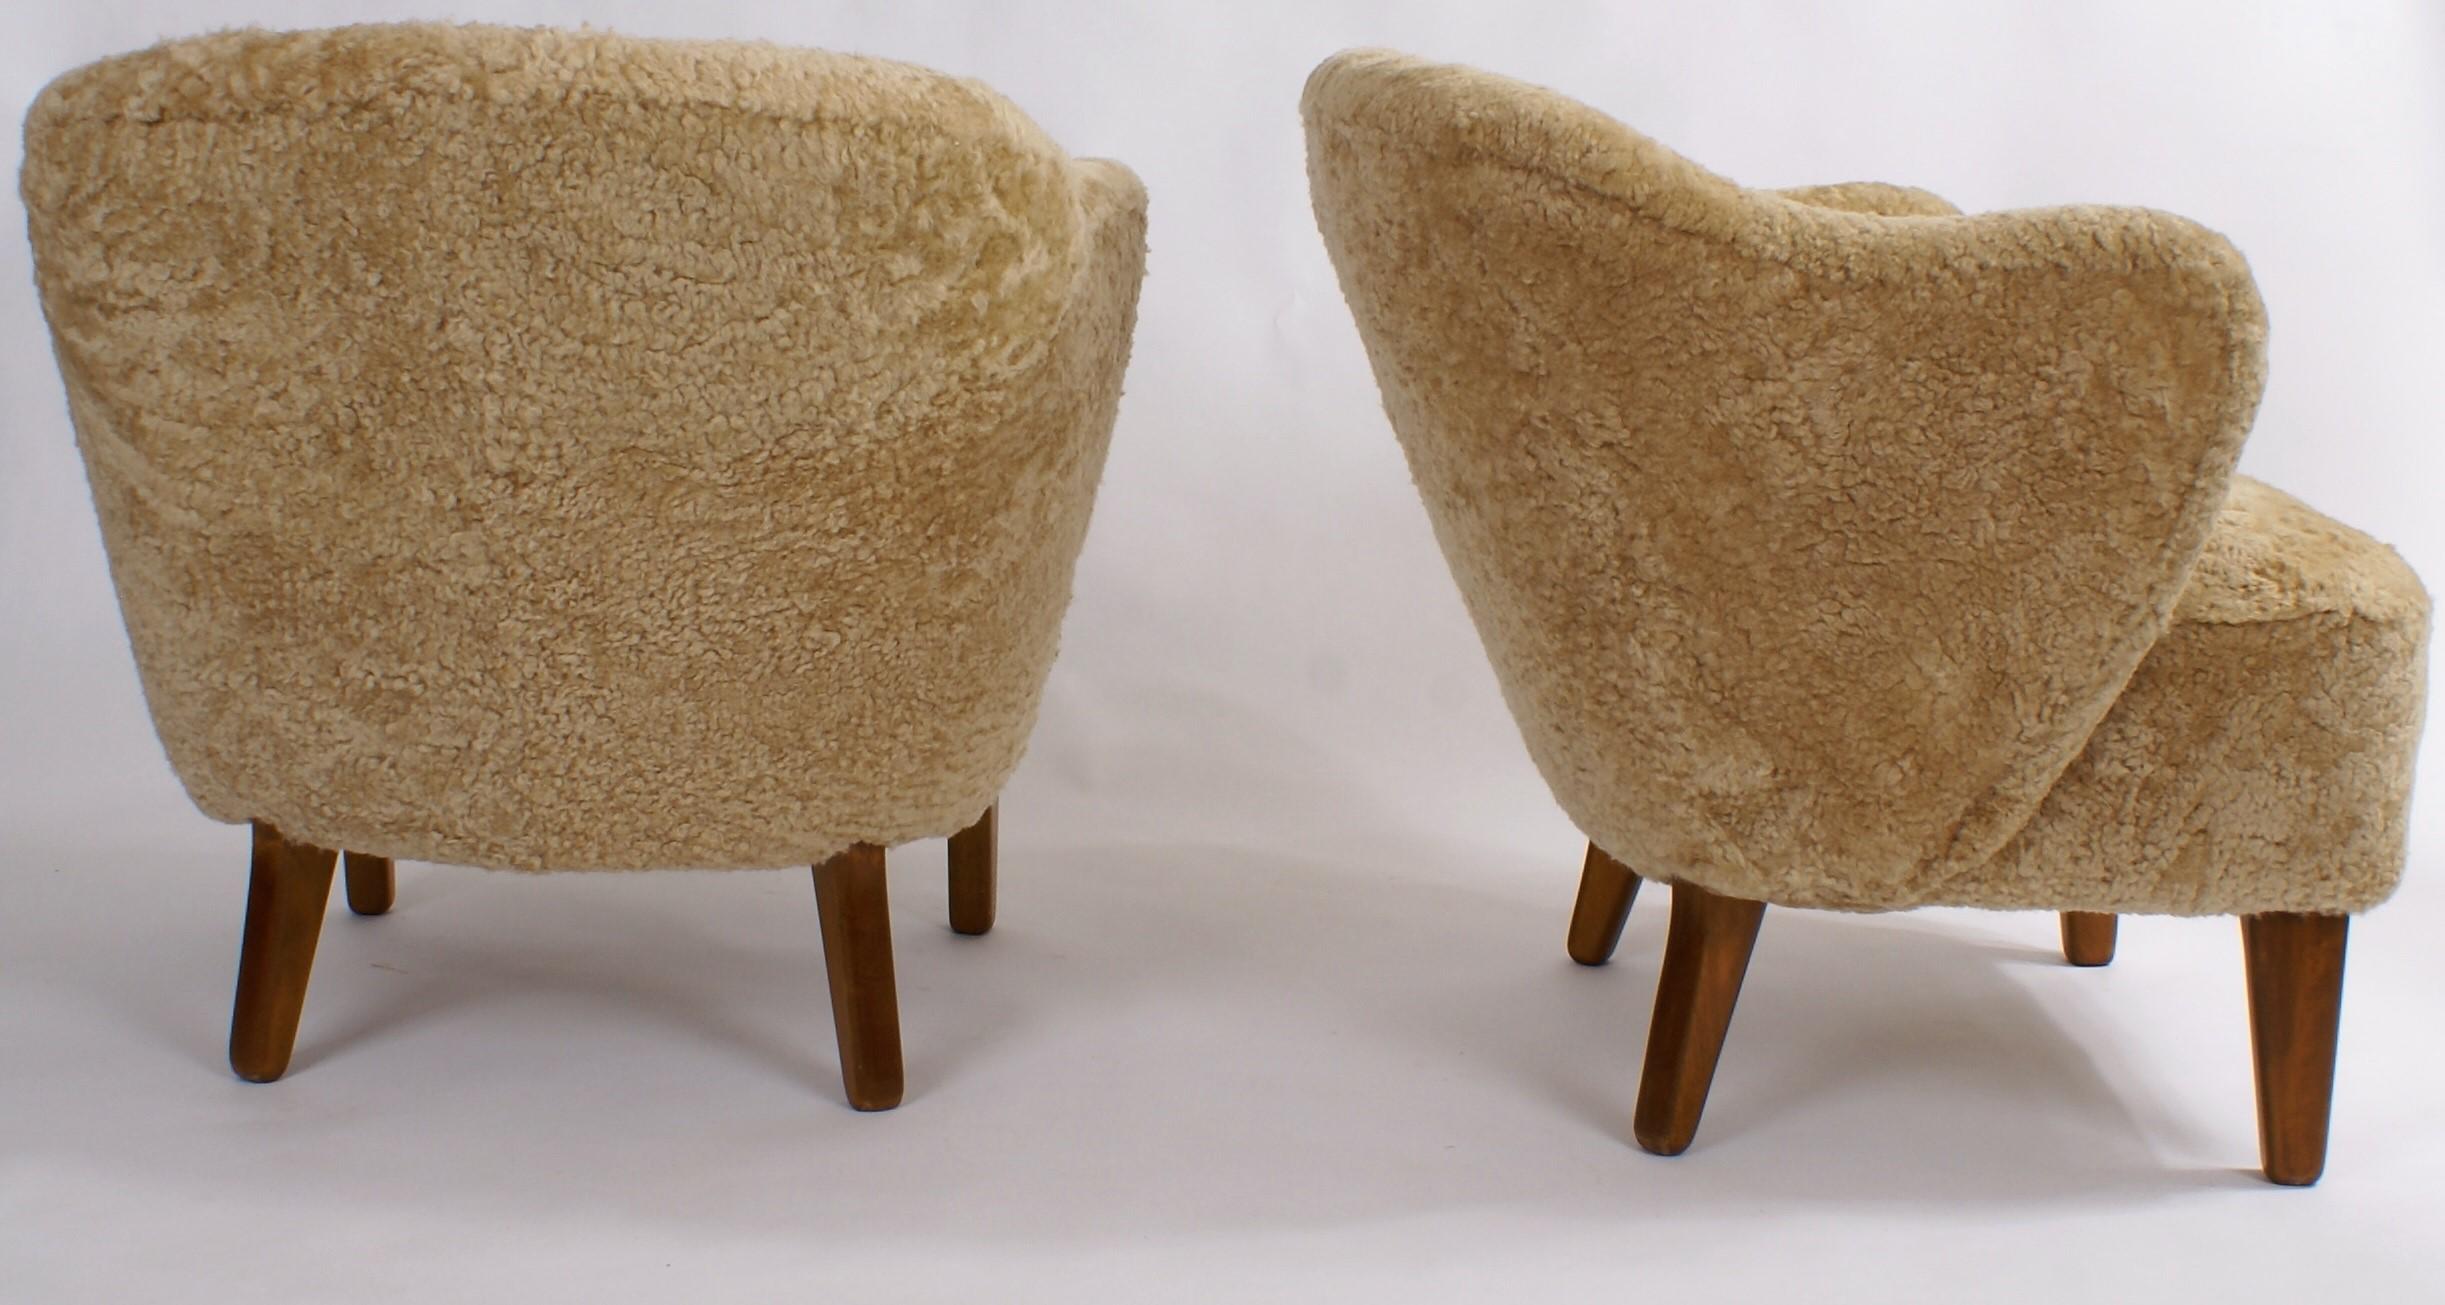 Flemming Lassen Pair of Easy Chairs in Honey Colored Sheepksin, 1940s im Angebot 3